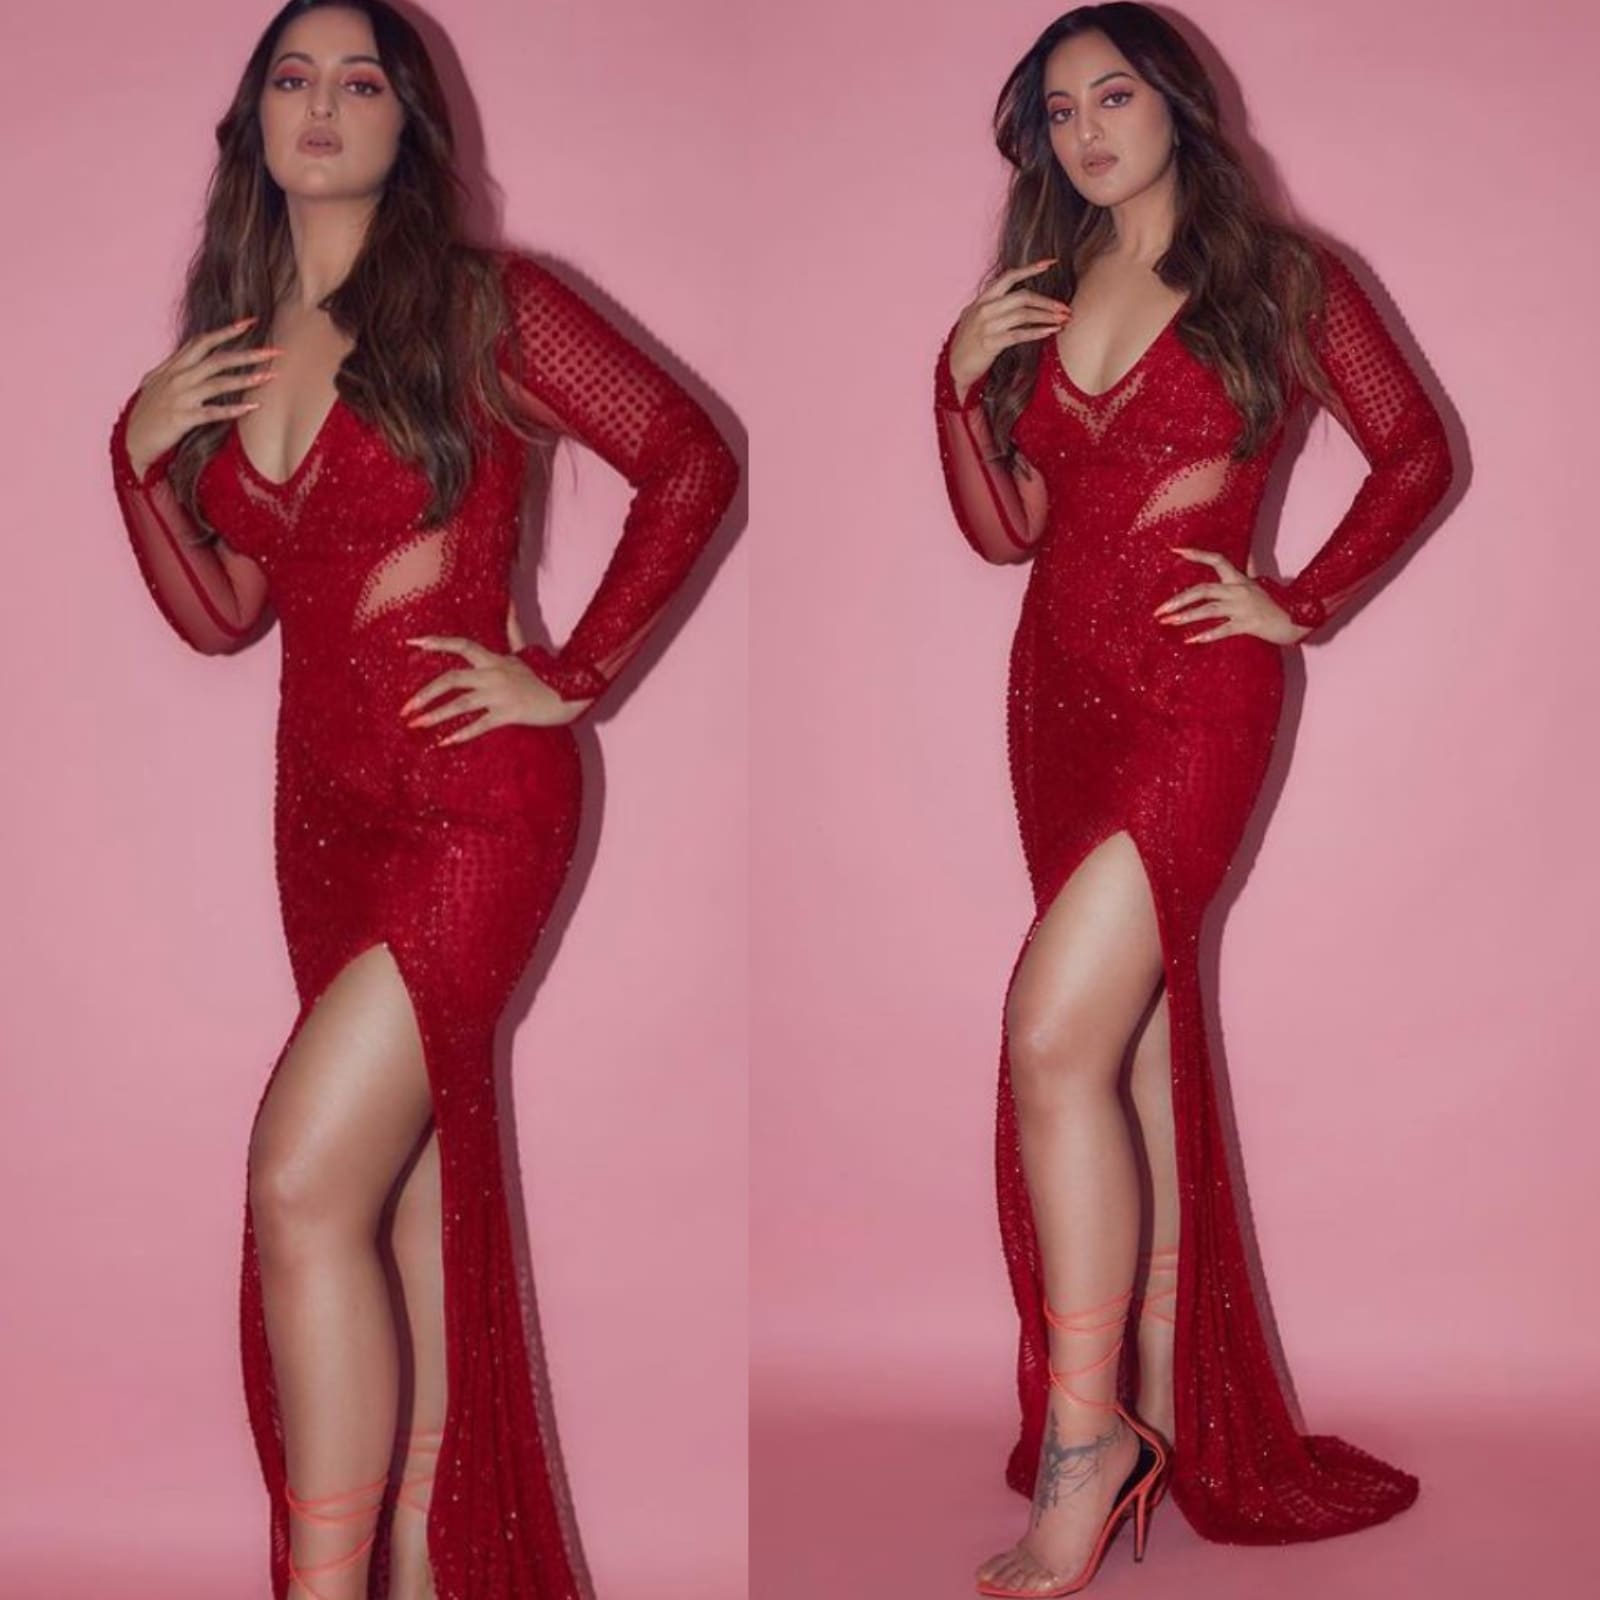 Sonakshi Sinha Xvidio - Sonakshi Sinha Raises The Glam Quotient In A Red Thigh-High Slit Dress -  News18